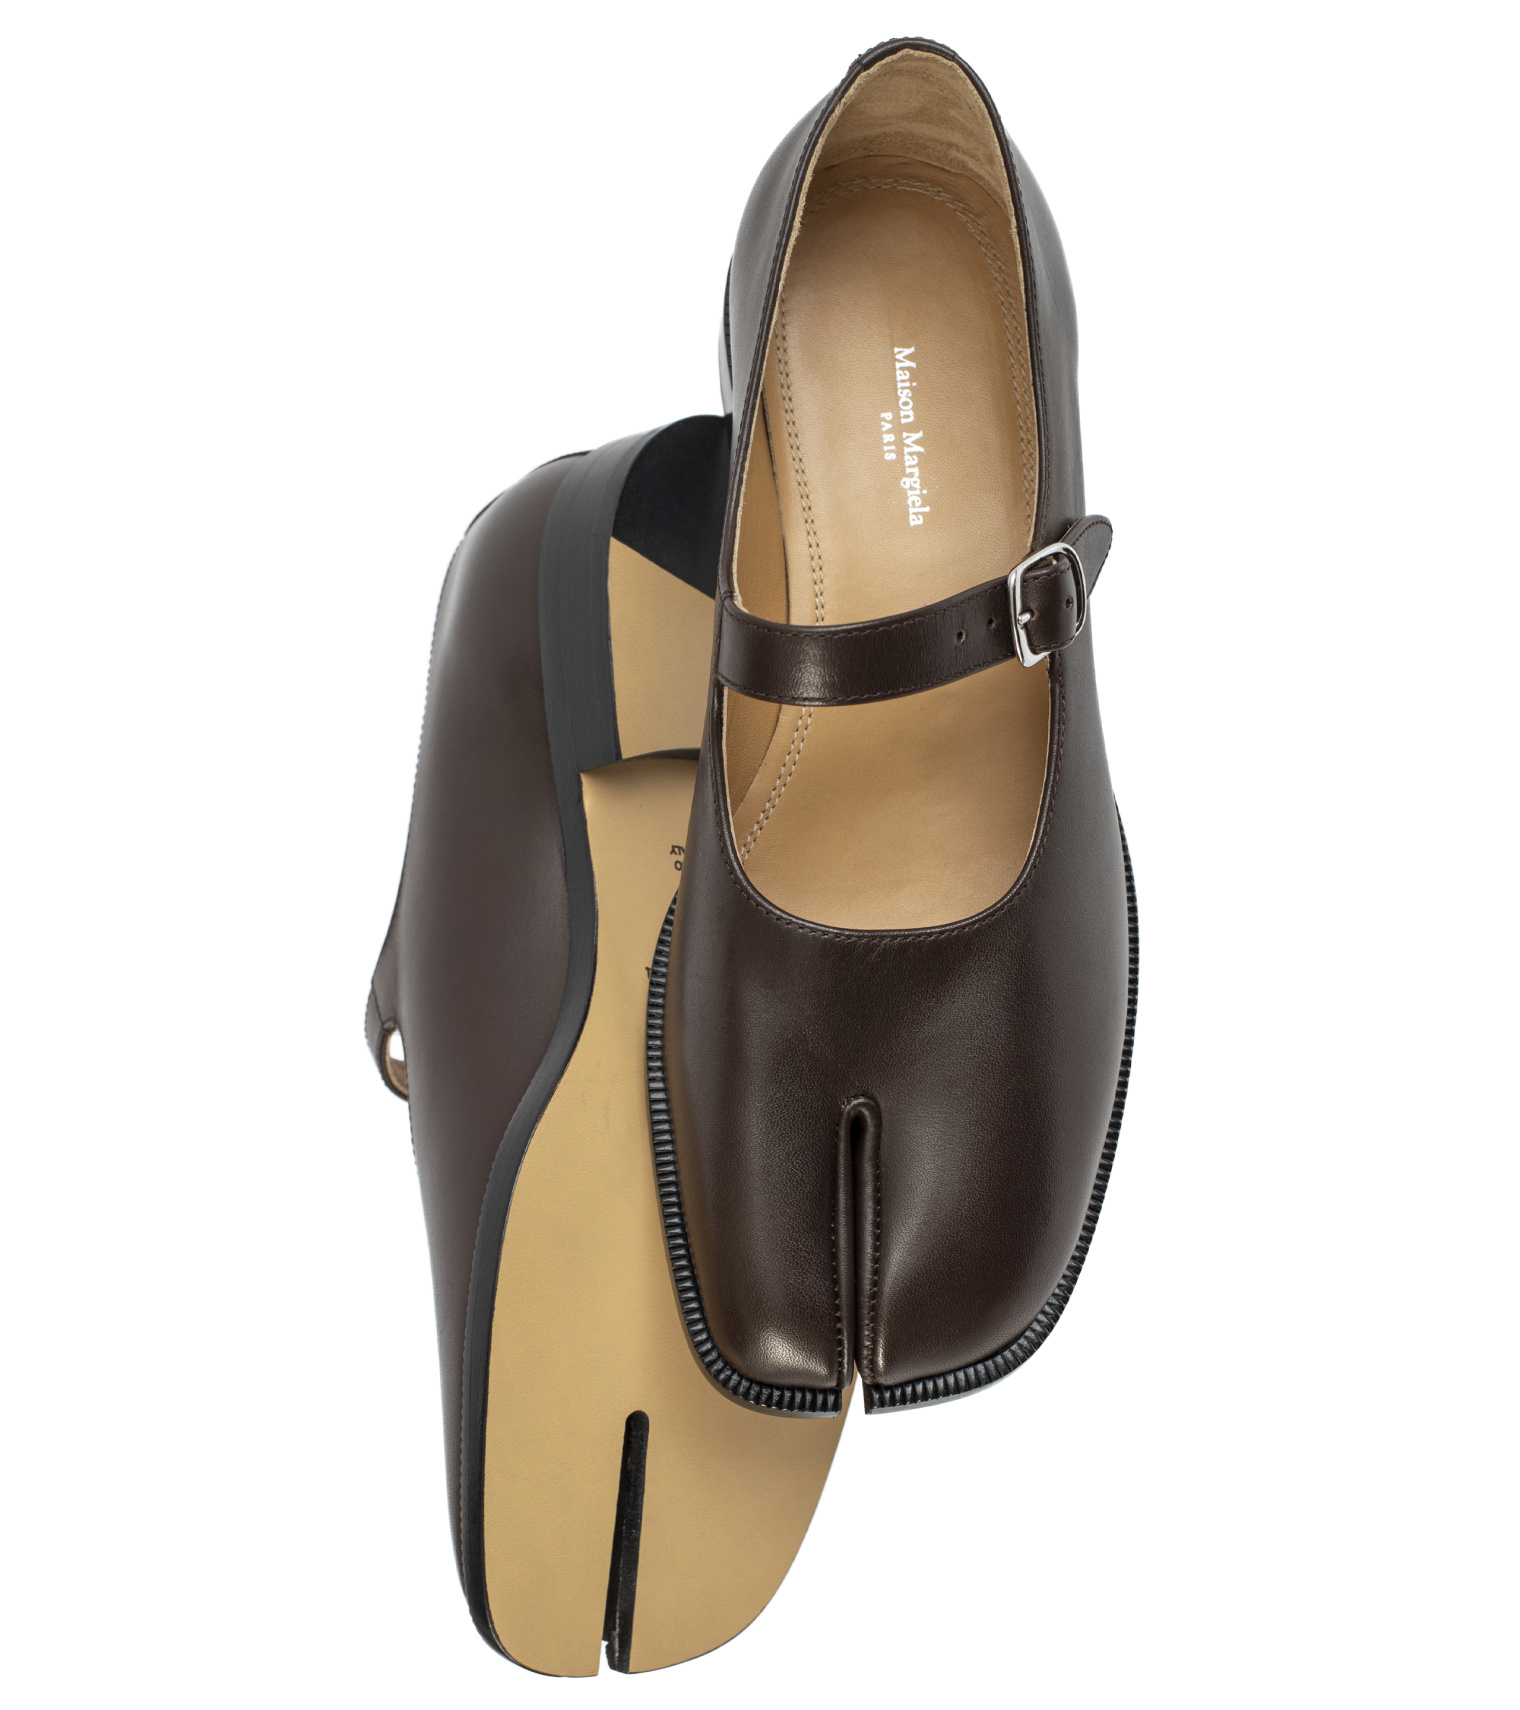 Maison Margiela Tabi Mary-Jany shoes in brown